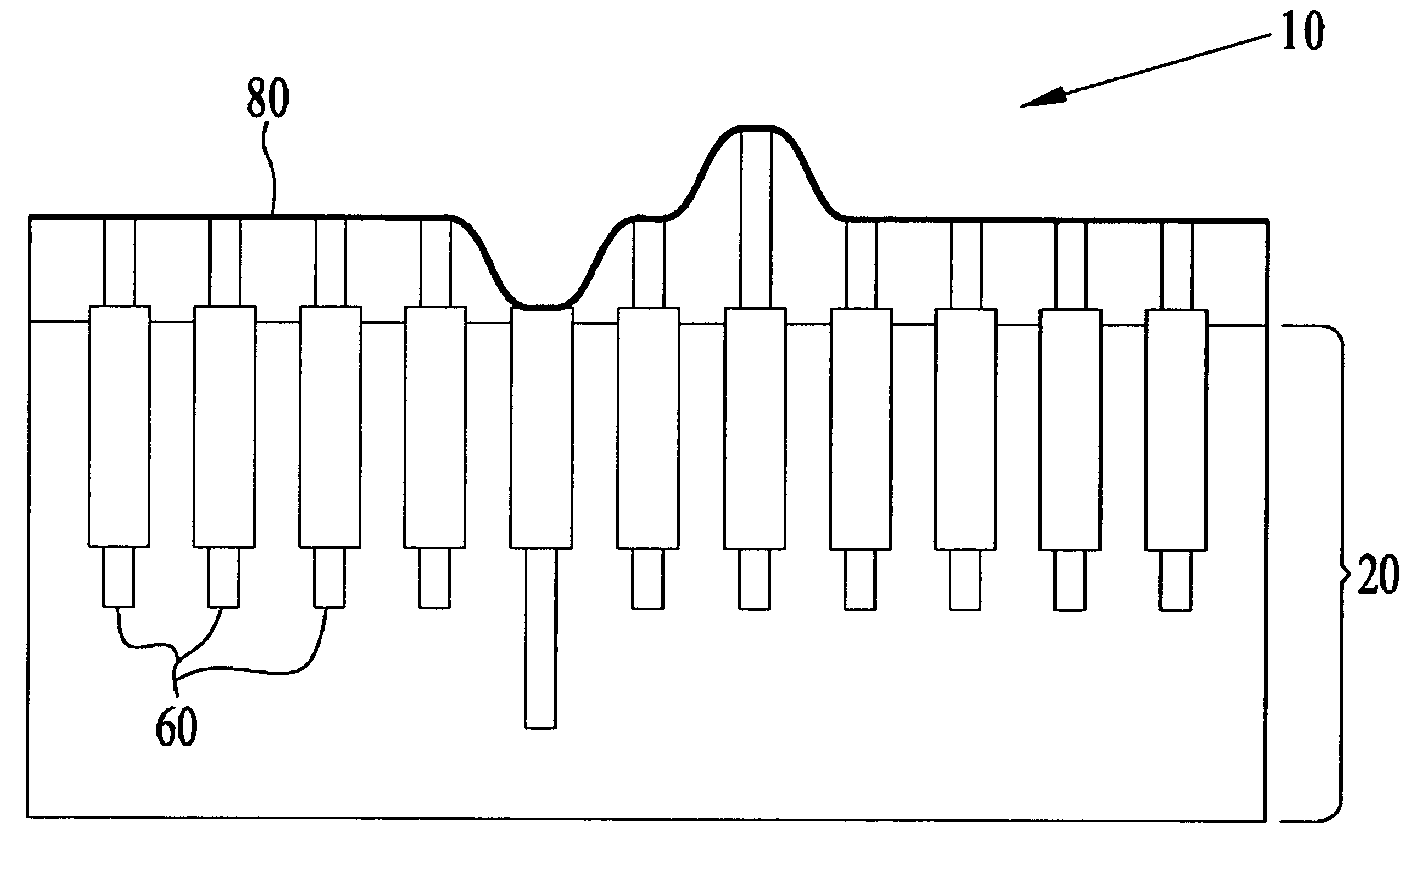 Apparatus and method for incorporating tactile control and tactile feedback into a human-machine interface